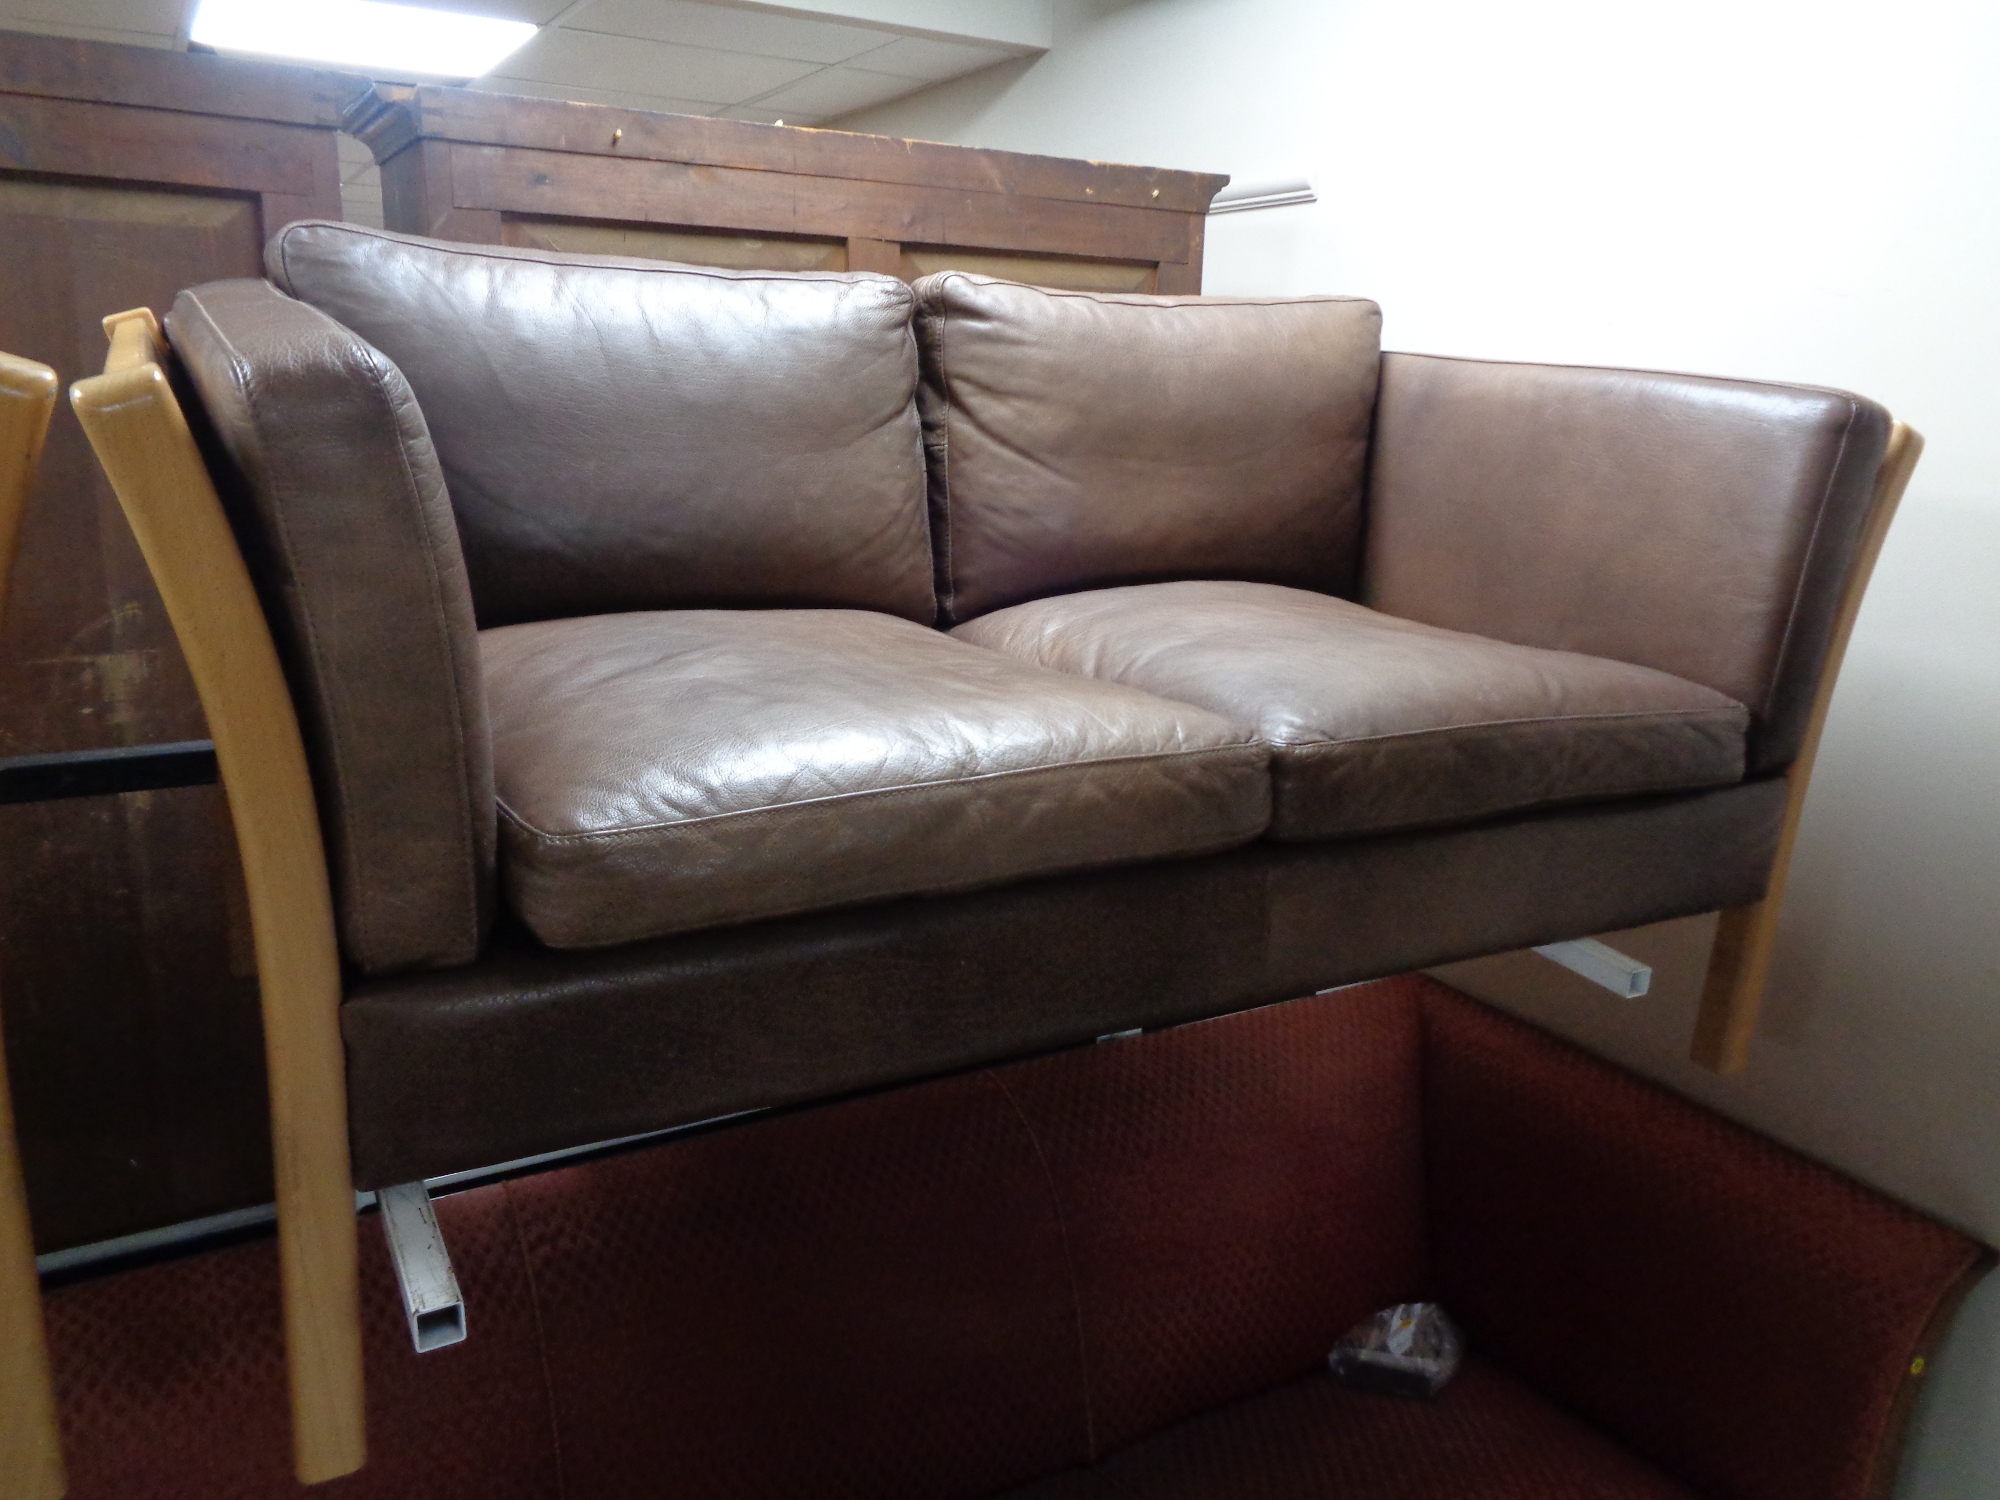 A 20th century Stouby wood framed brown leather three seater settee with matching two seater settee. - Image 3 of 3